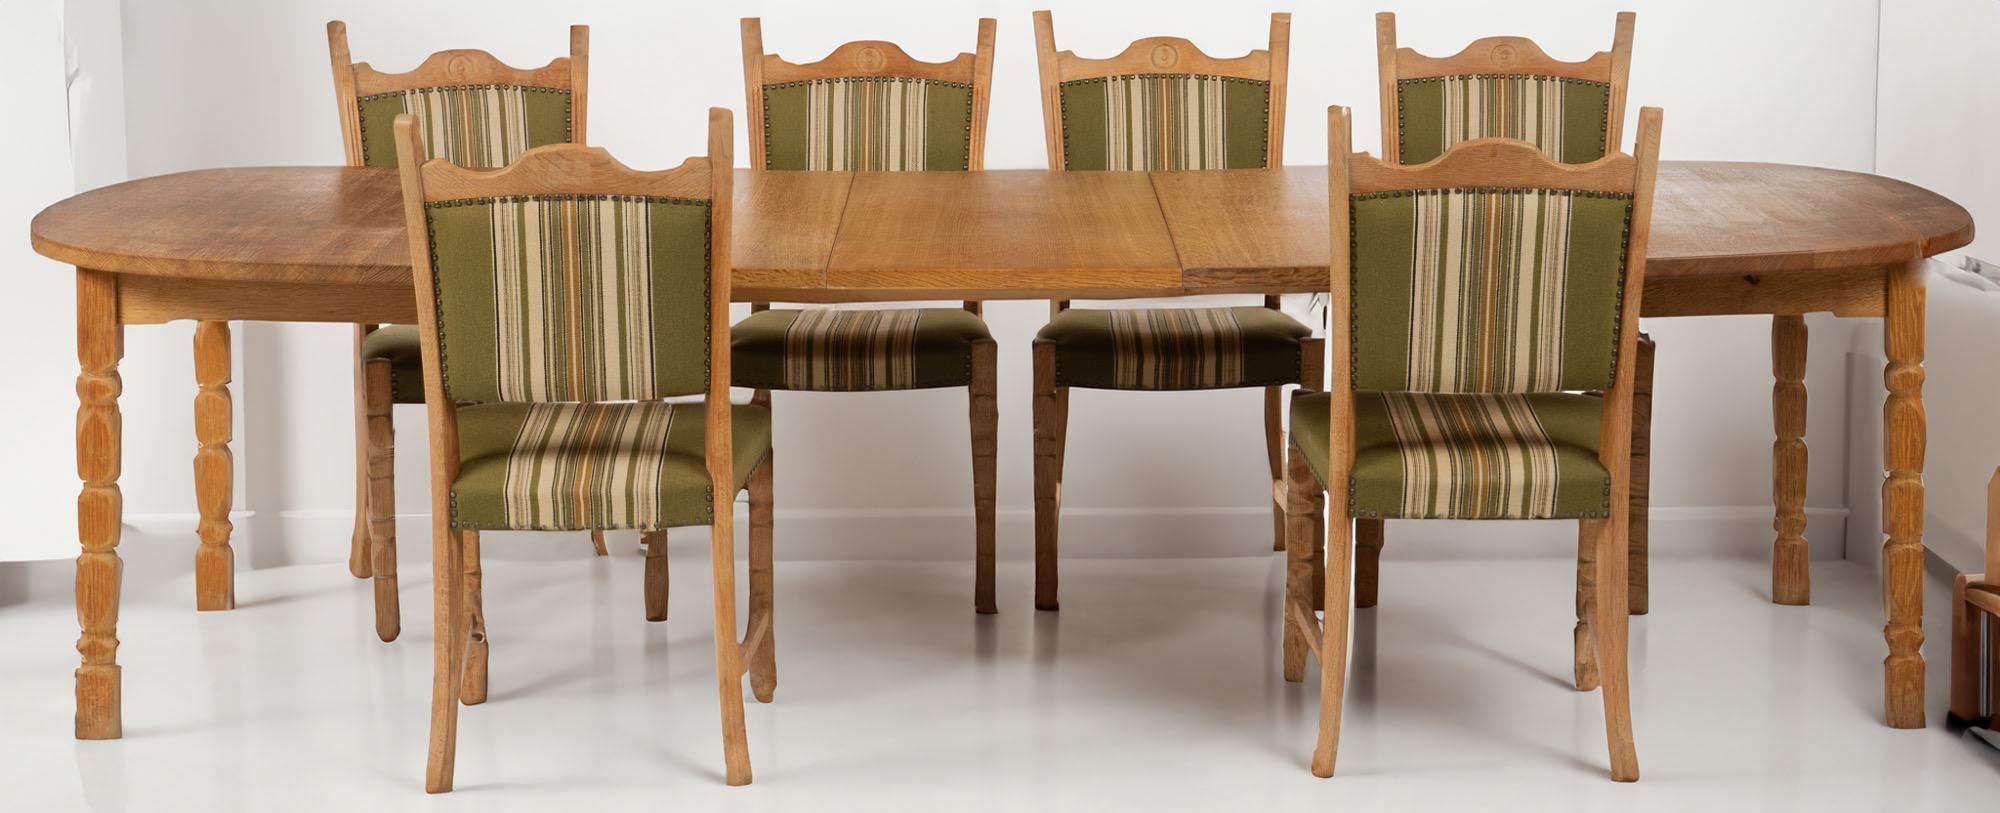 Danish modern brutalist rustic solid oak extendable dining table with 3 removable leaves and set of 6 oak dining chairs by Henning Kjærnulf features hand-crafted details with sculpted legs. With leaves, this dining table can easily fit 8-10 dining